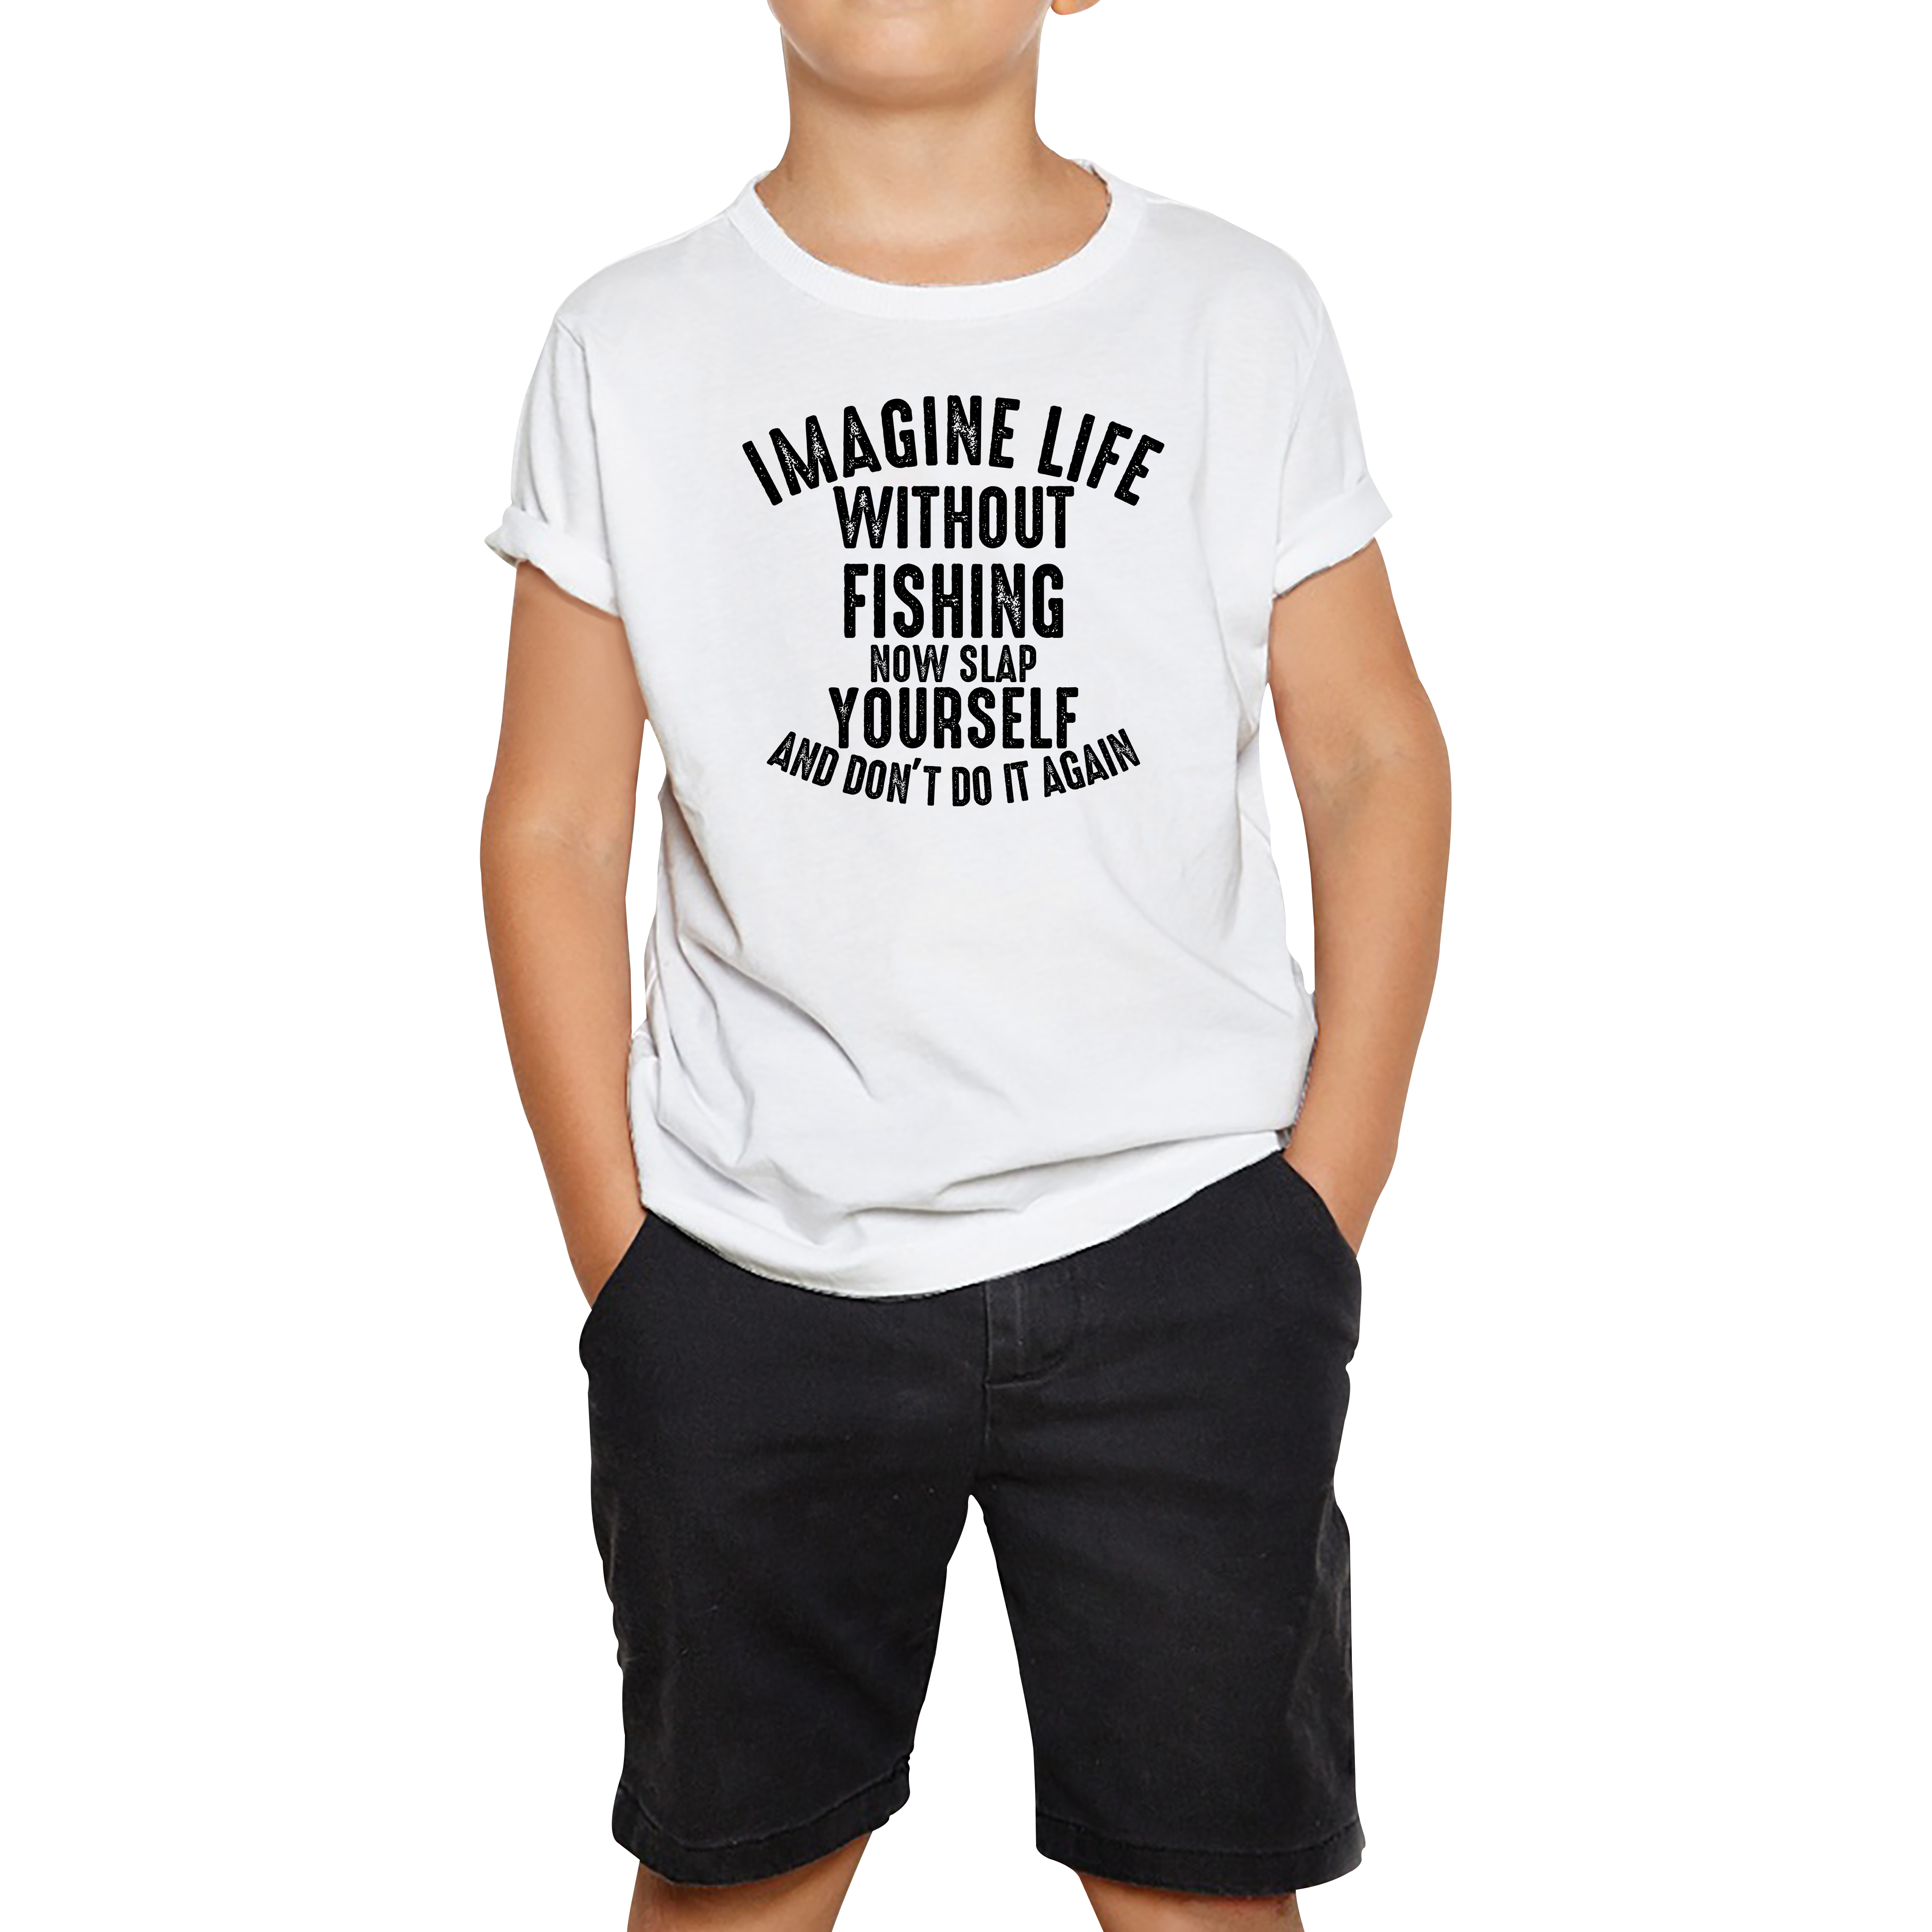 Imagine Life Without Fishing Now Slap Yourself And Don't Do It Again T-Shirt Fisherman Fishing Adventure Hobby Funny Kids Tee